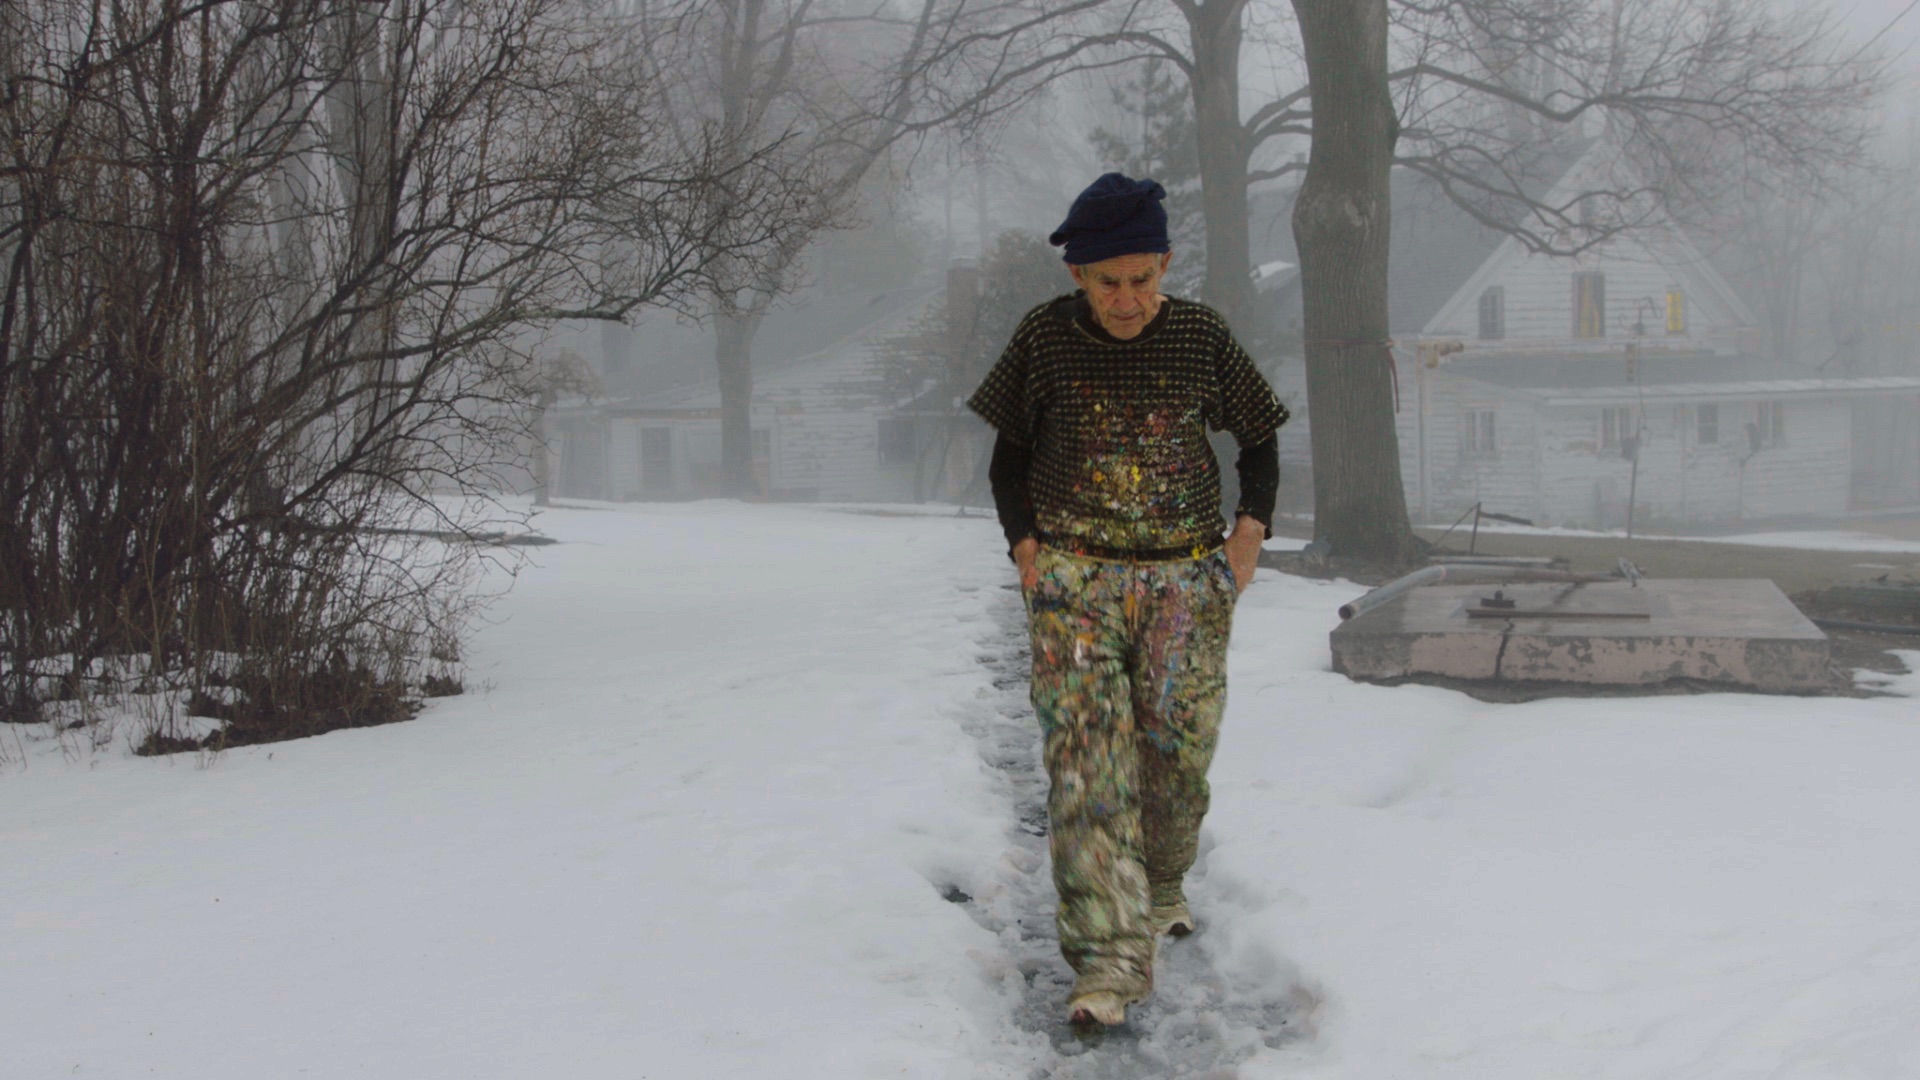  Painter Larry Poons walking to his studio in  The Price of Everything , directed by Nathaniel Kahn. Courtesy of HBO. 